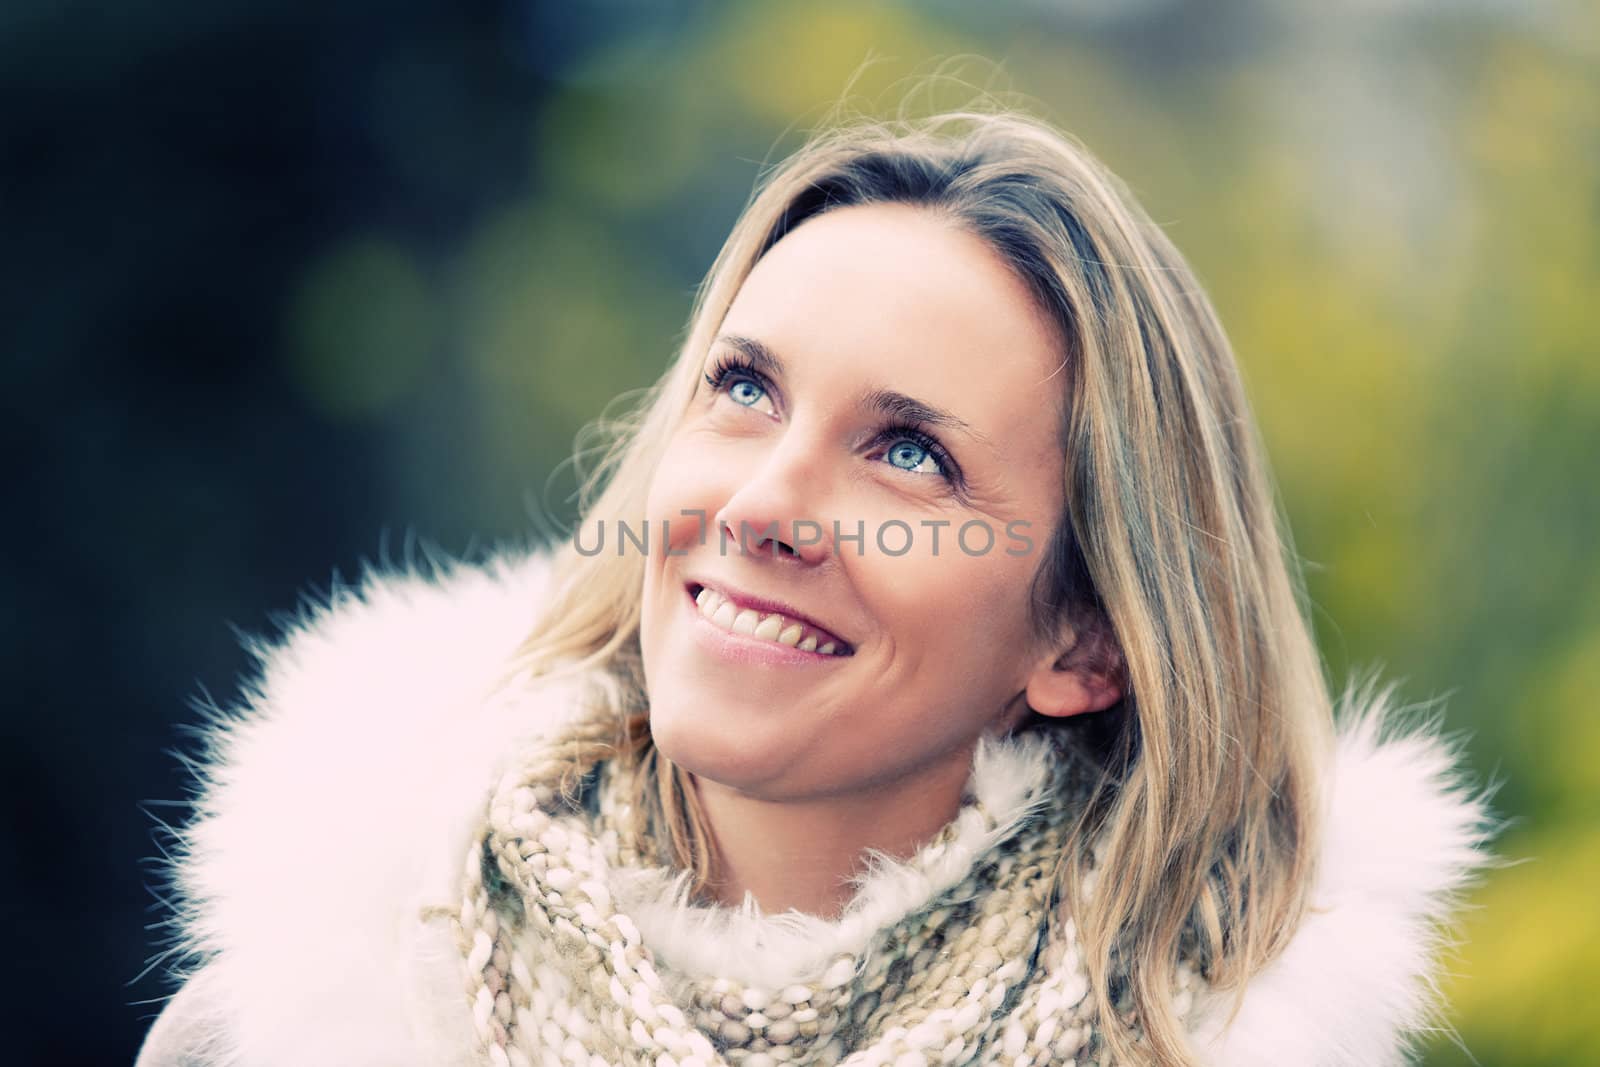 Closeup portrait of a happy young woman smiling 